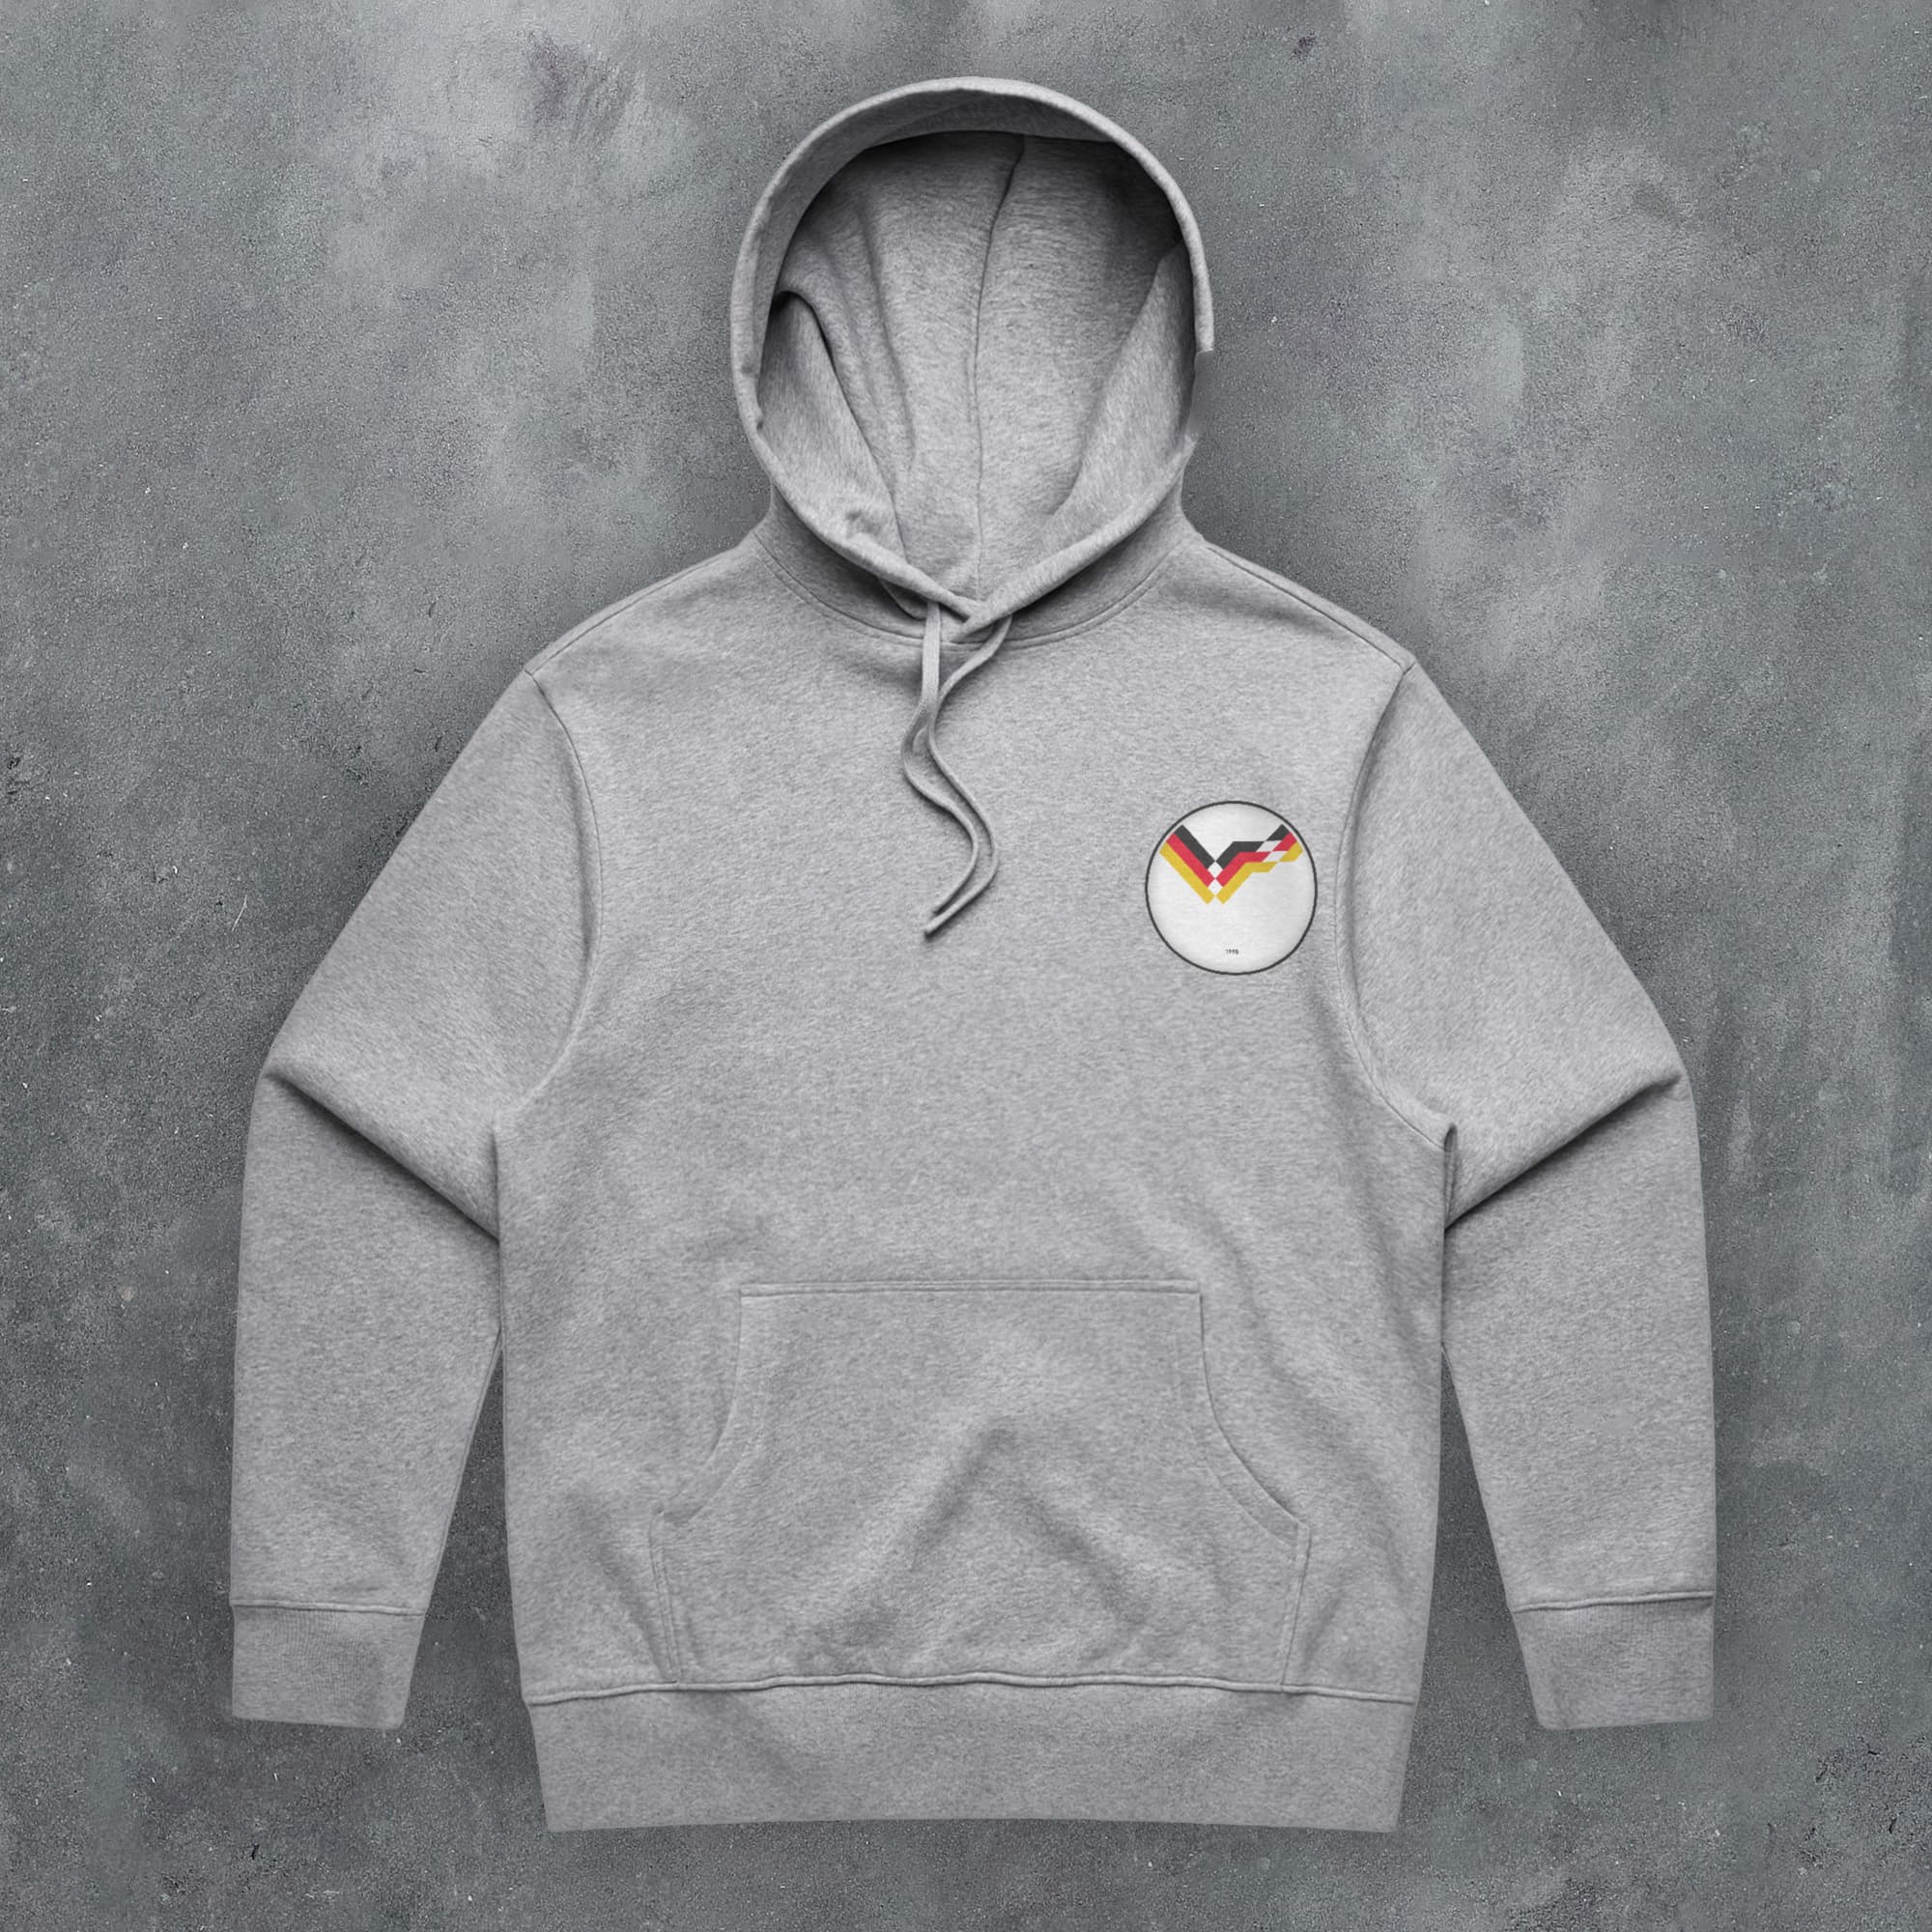 a grey hoodie with a picture of a bird on it